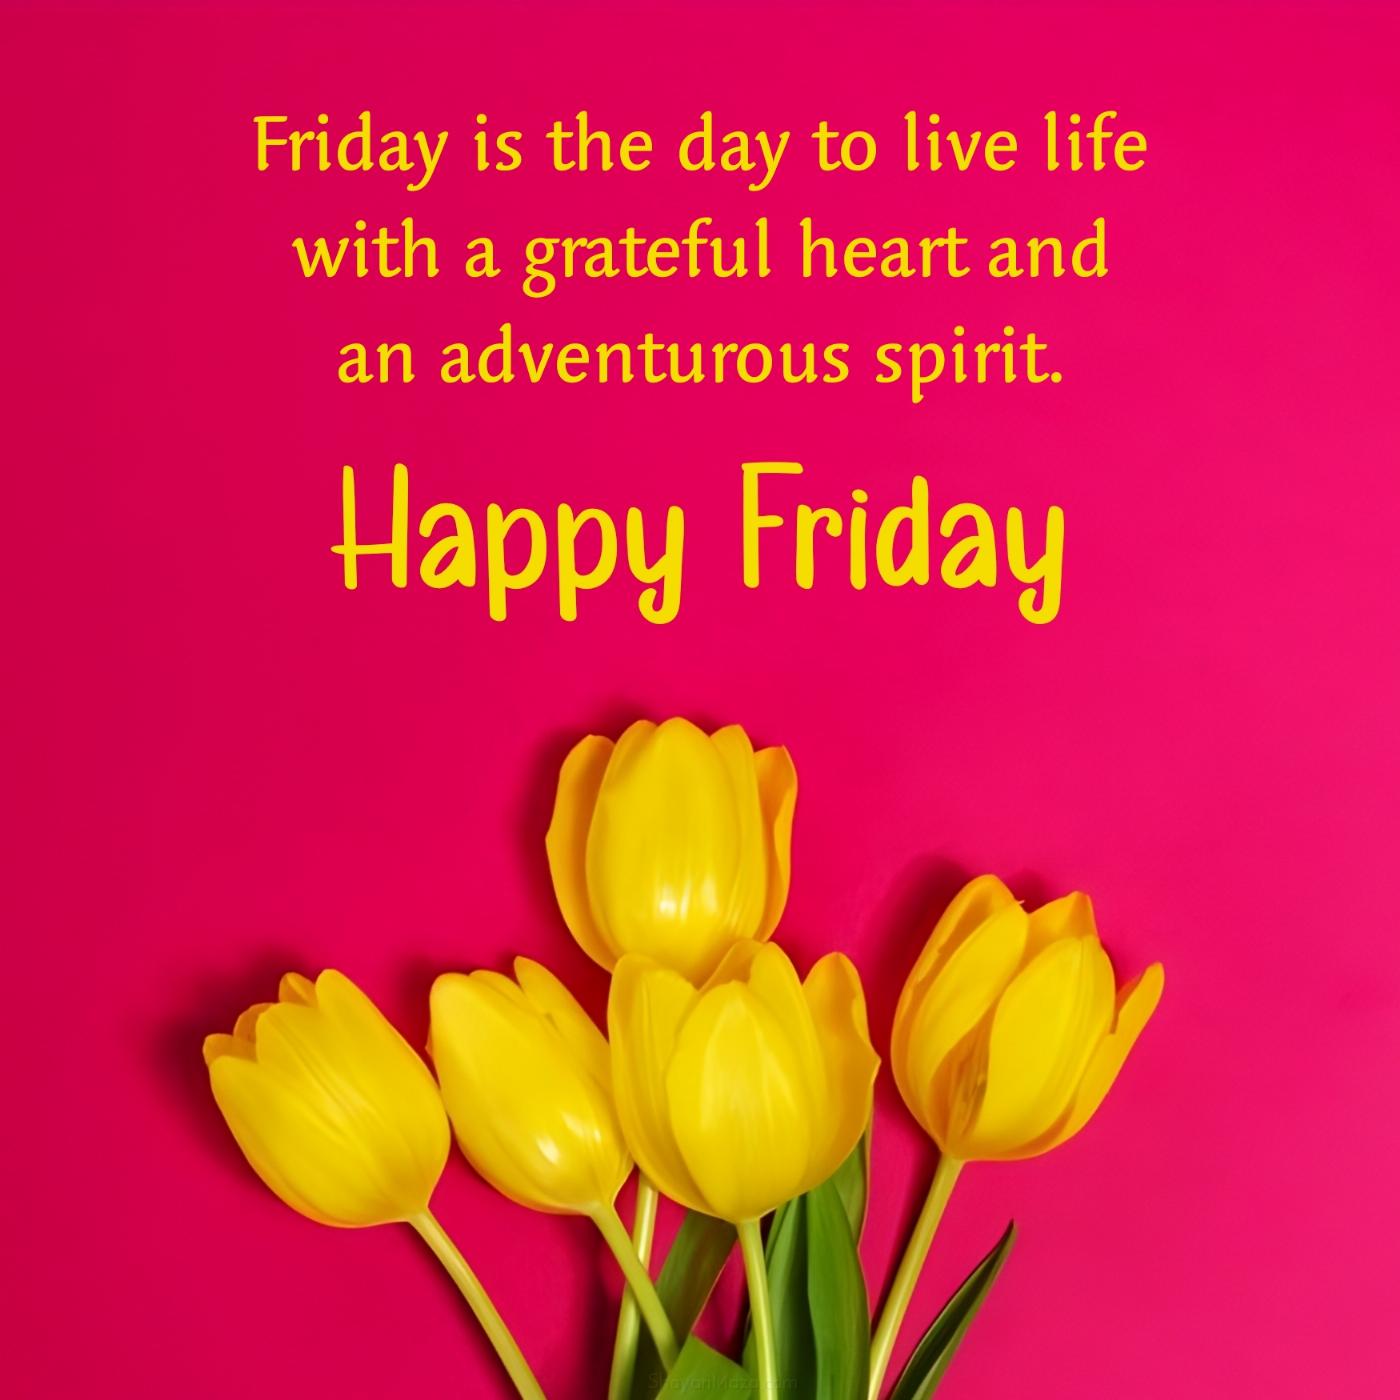 Friday is the day to live life with a grateful heart